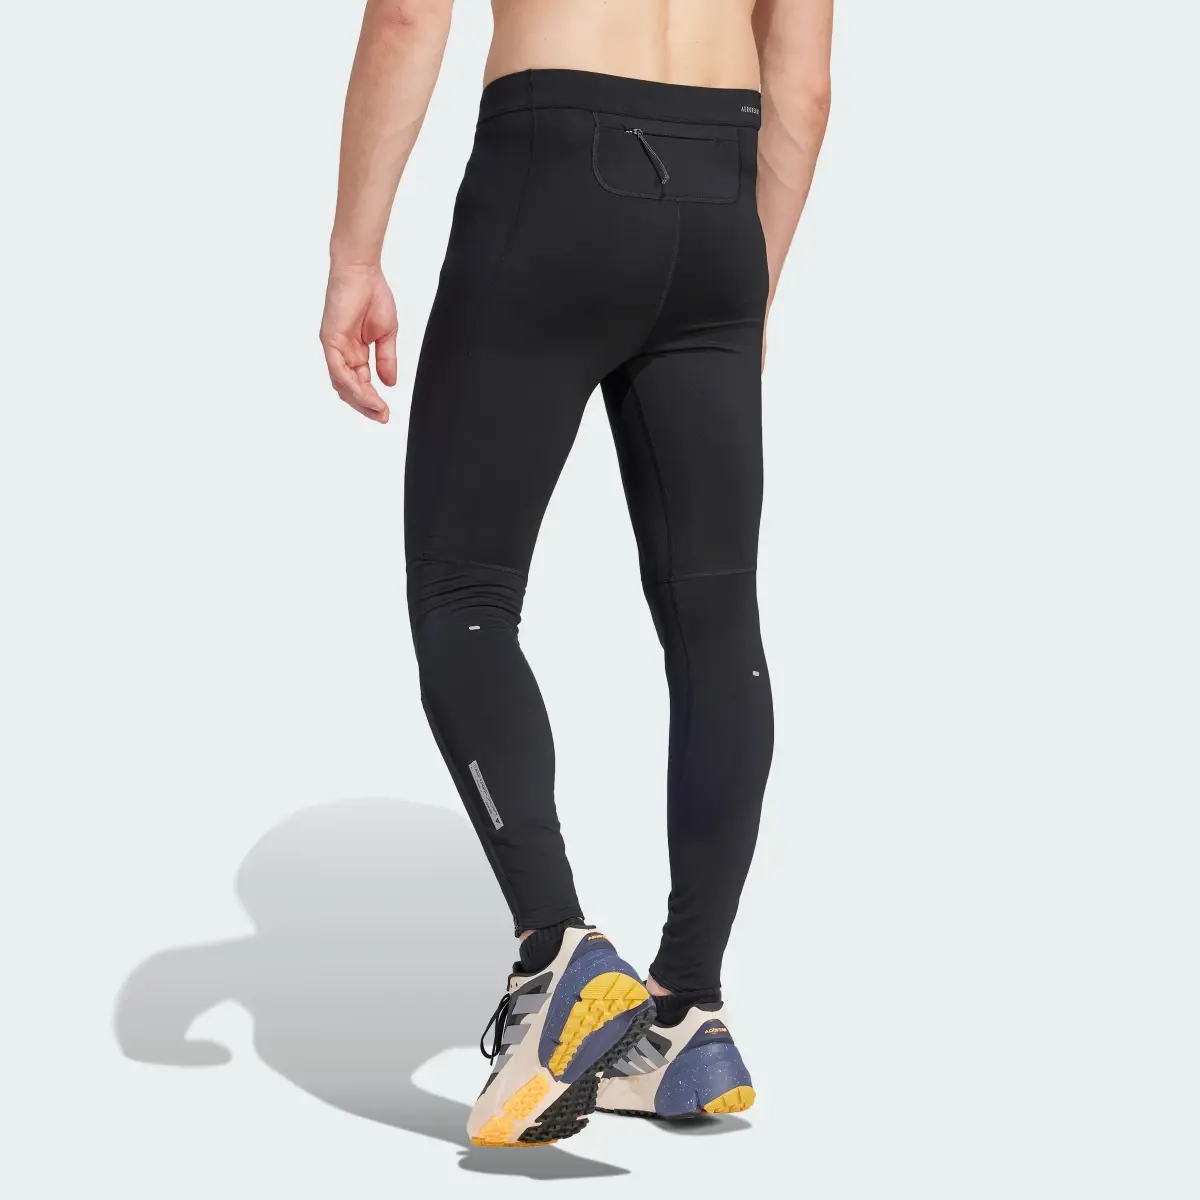 Adidas Ultimate Running Conquer the Elements AEROREADY Warming Leggings. 2